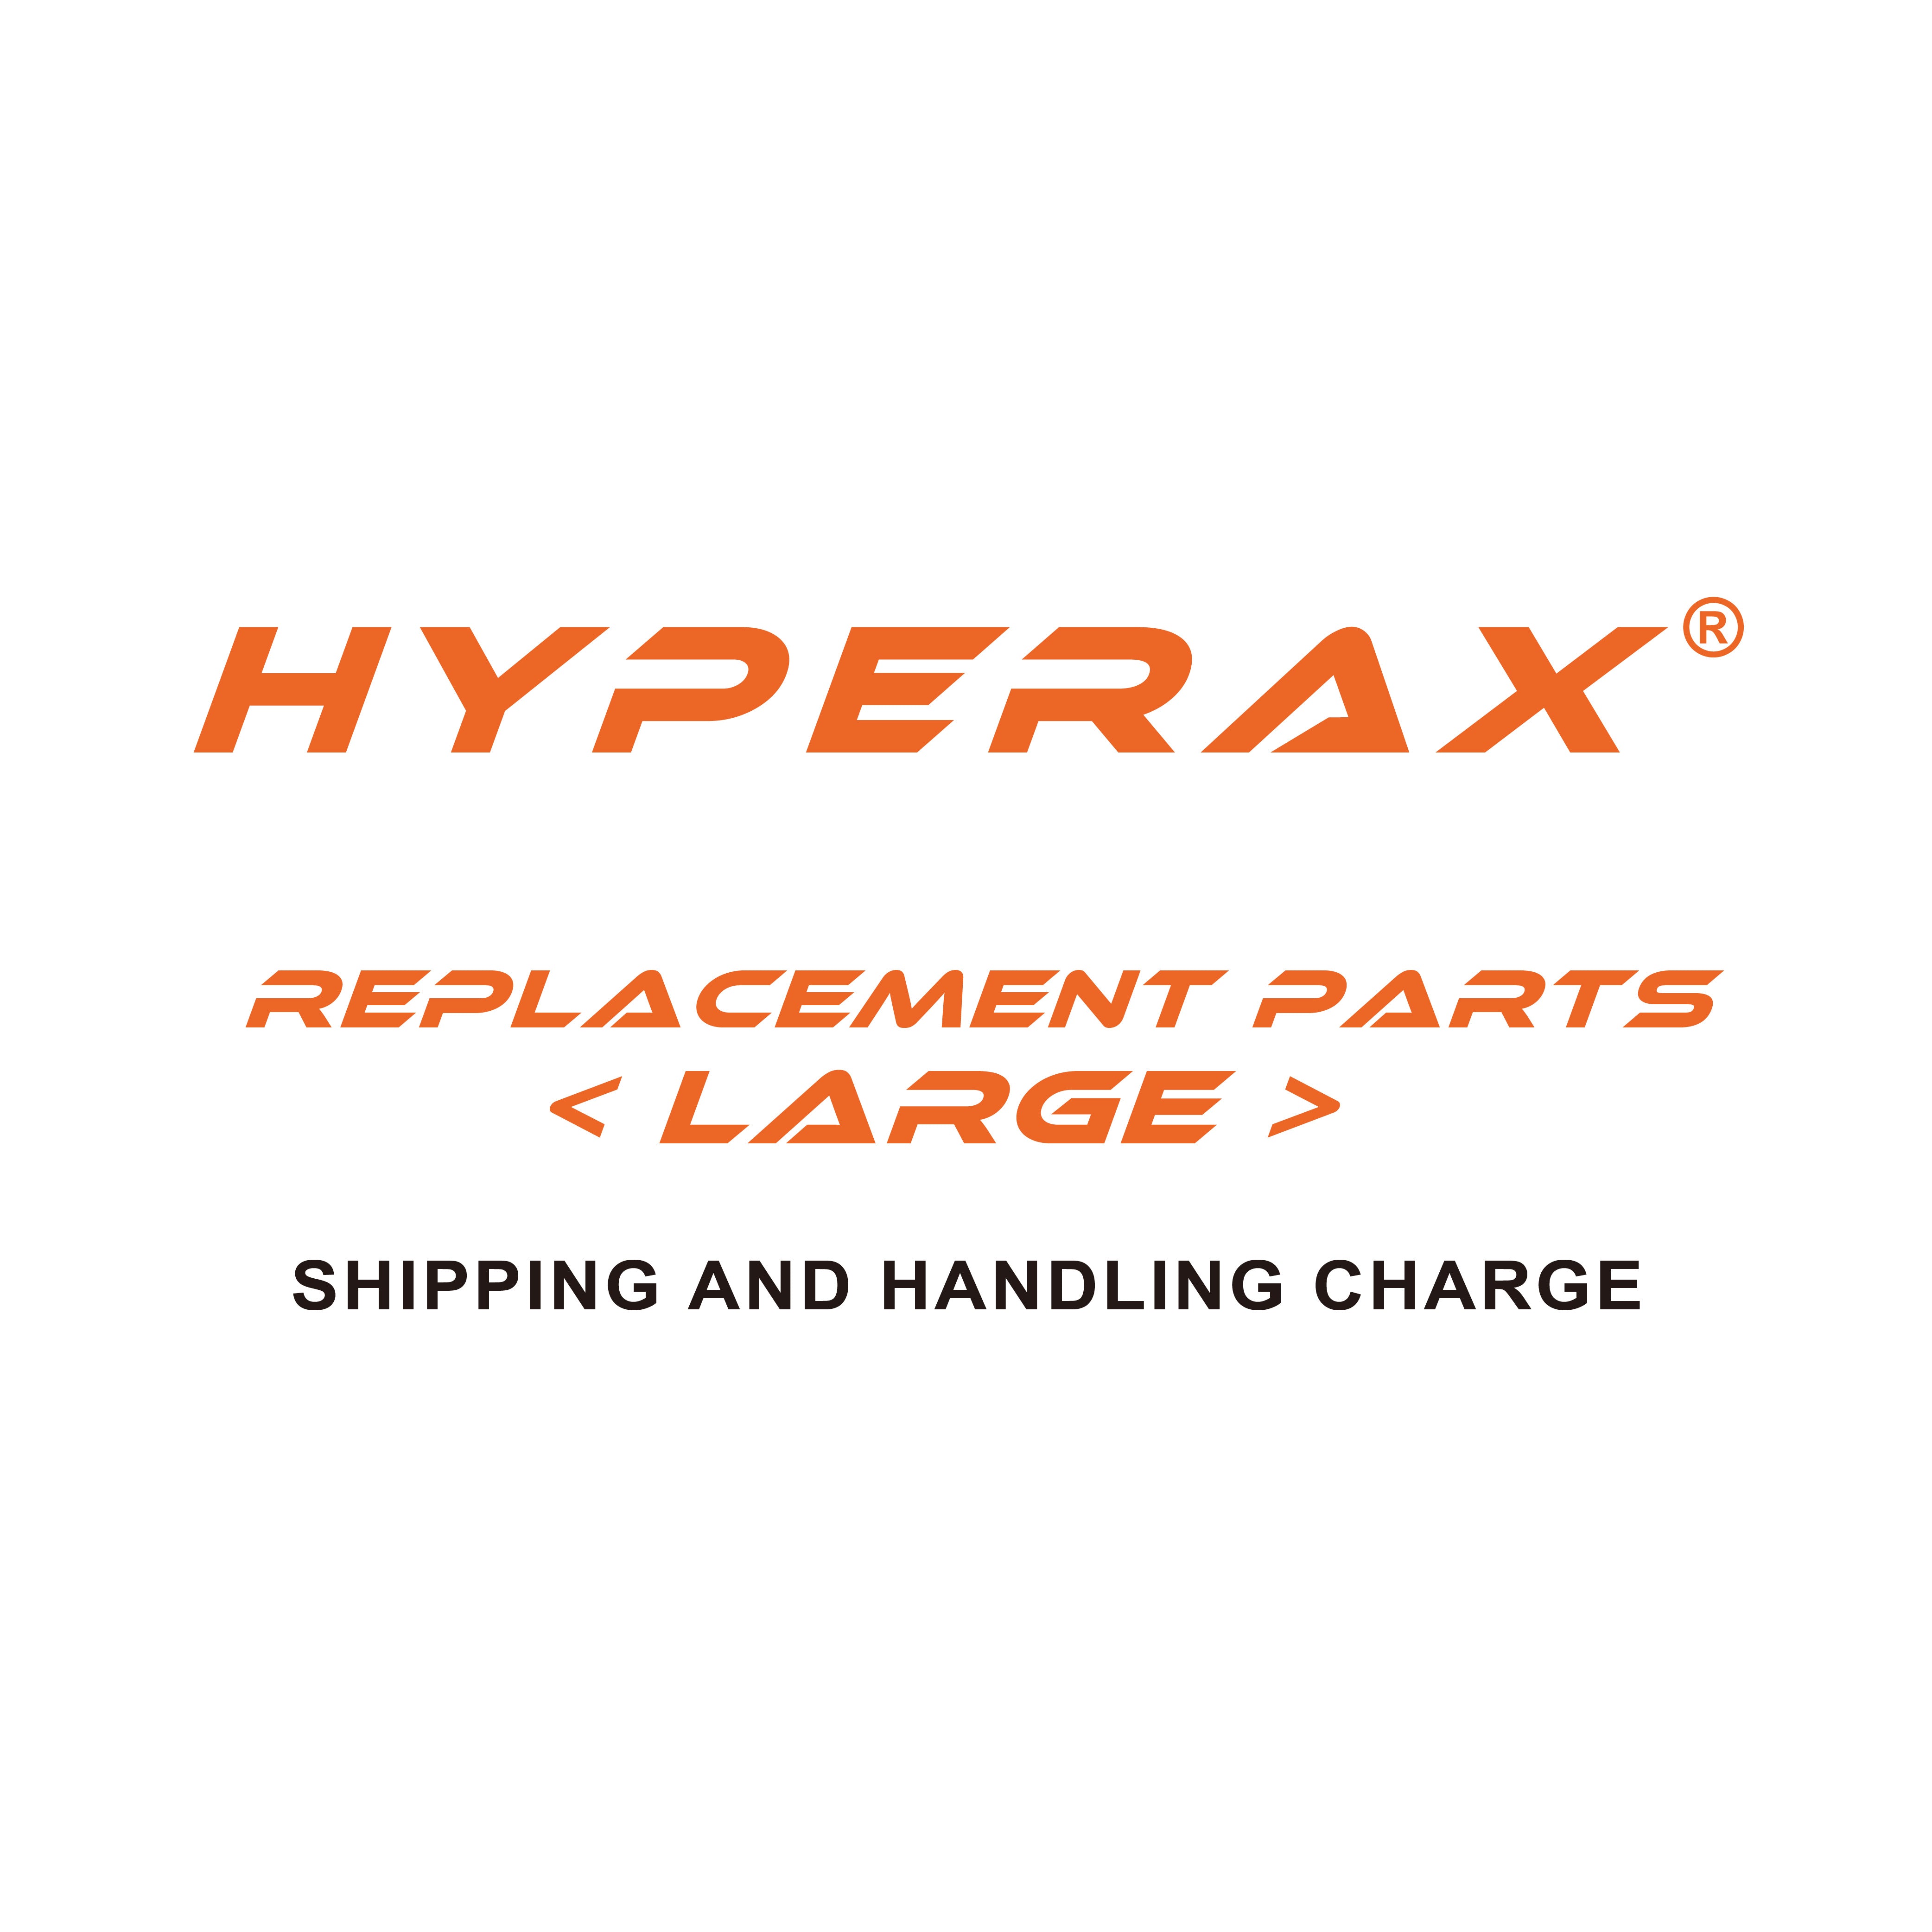 Shipping & Handling fee － Replacement parts －＜Large＞